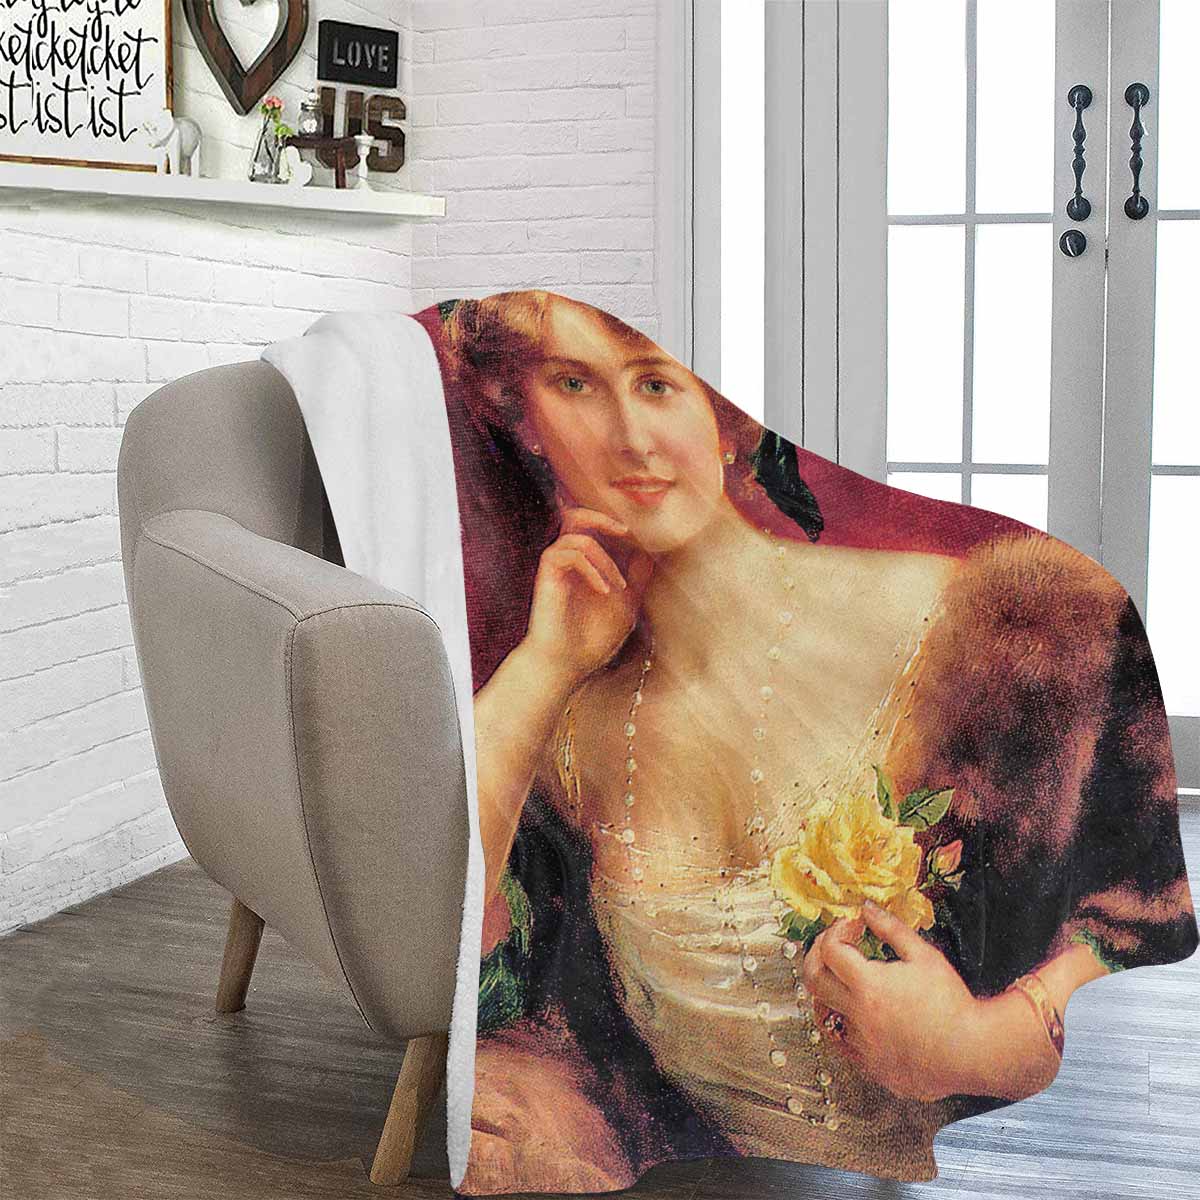 Victorian Lady Design BLANKET, LARGE 60 in x 80 in, Elegant Lady With YELLOW Roses